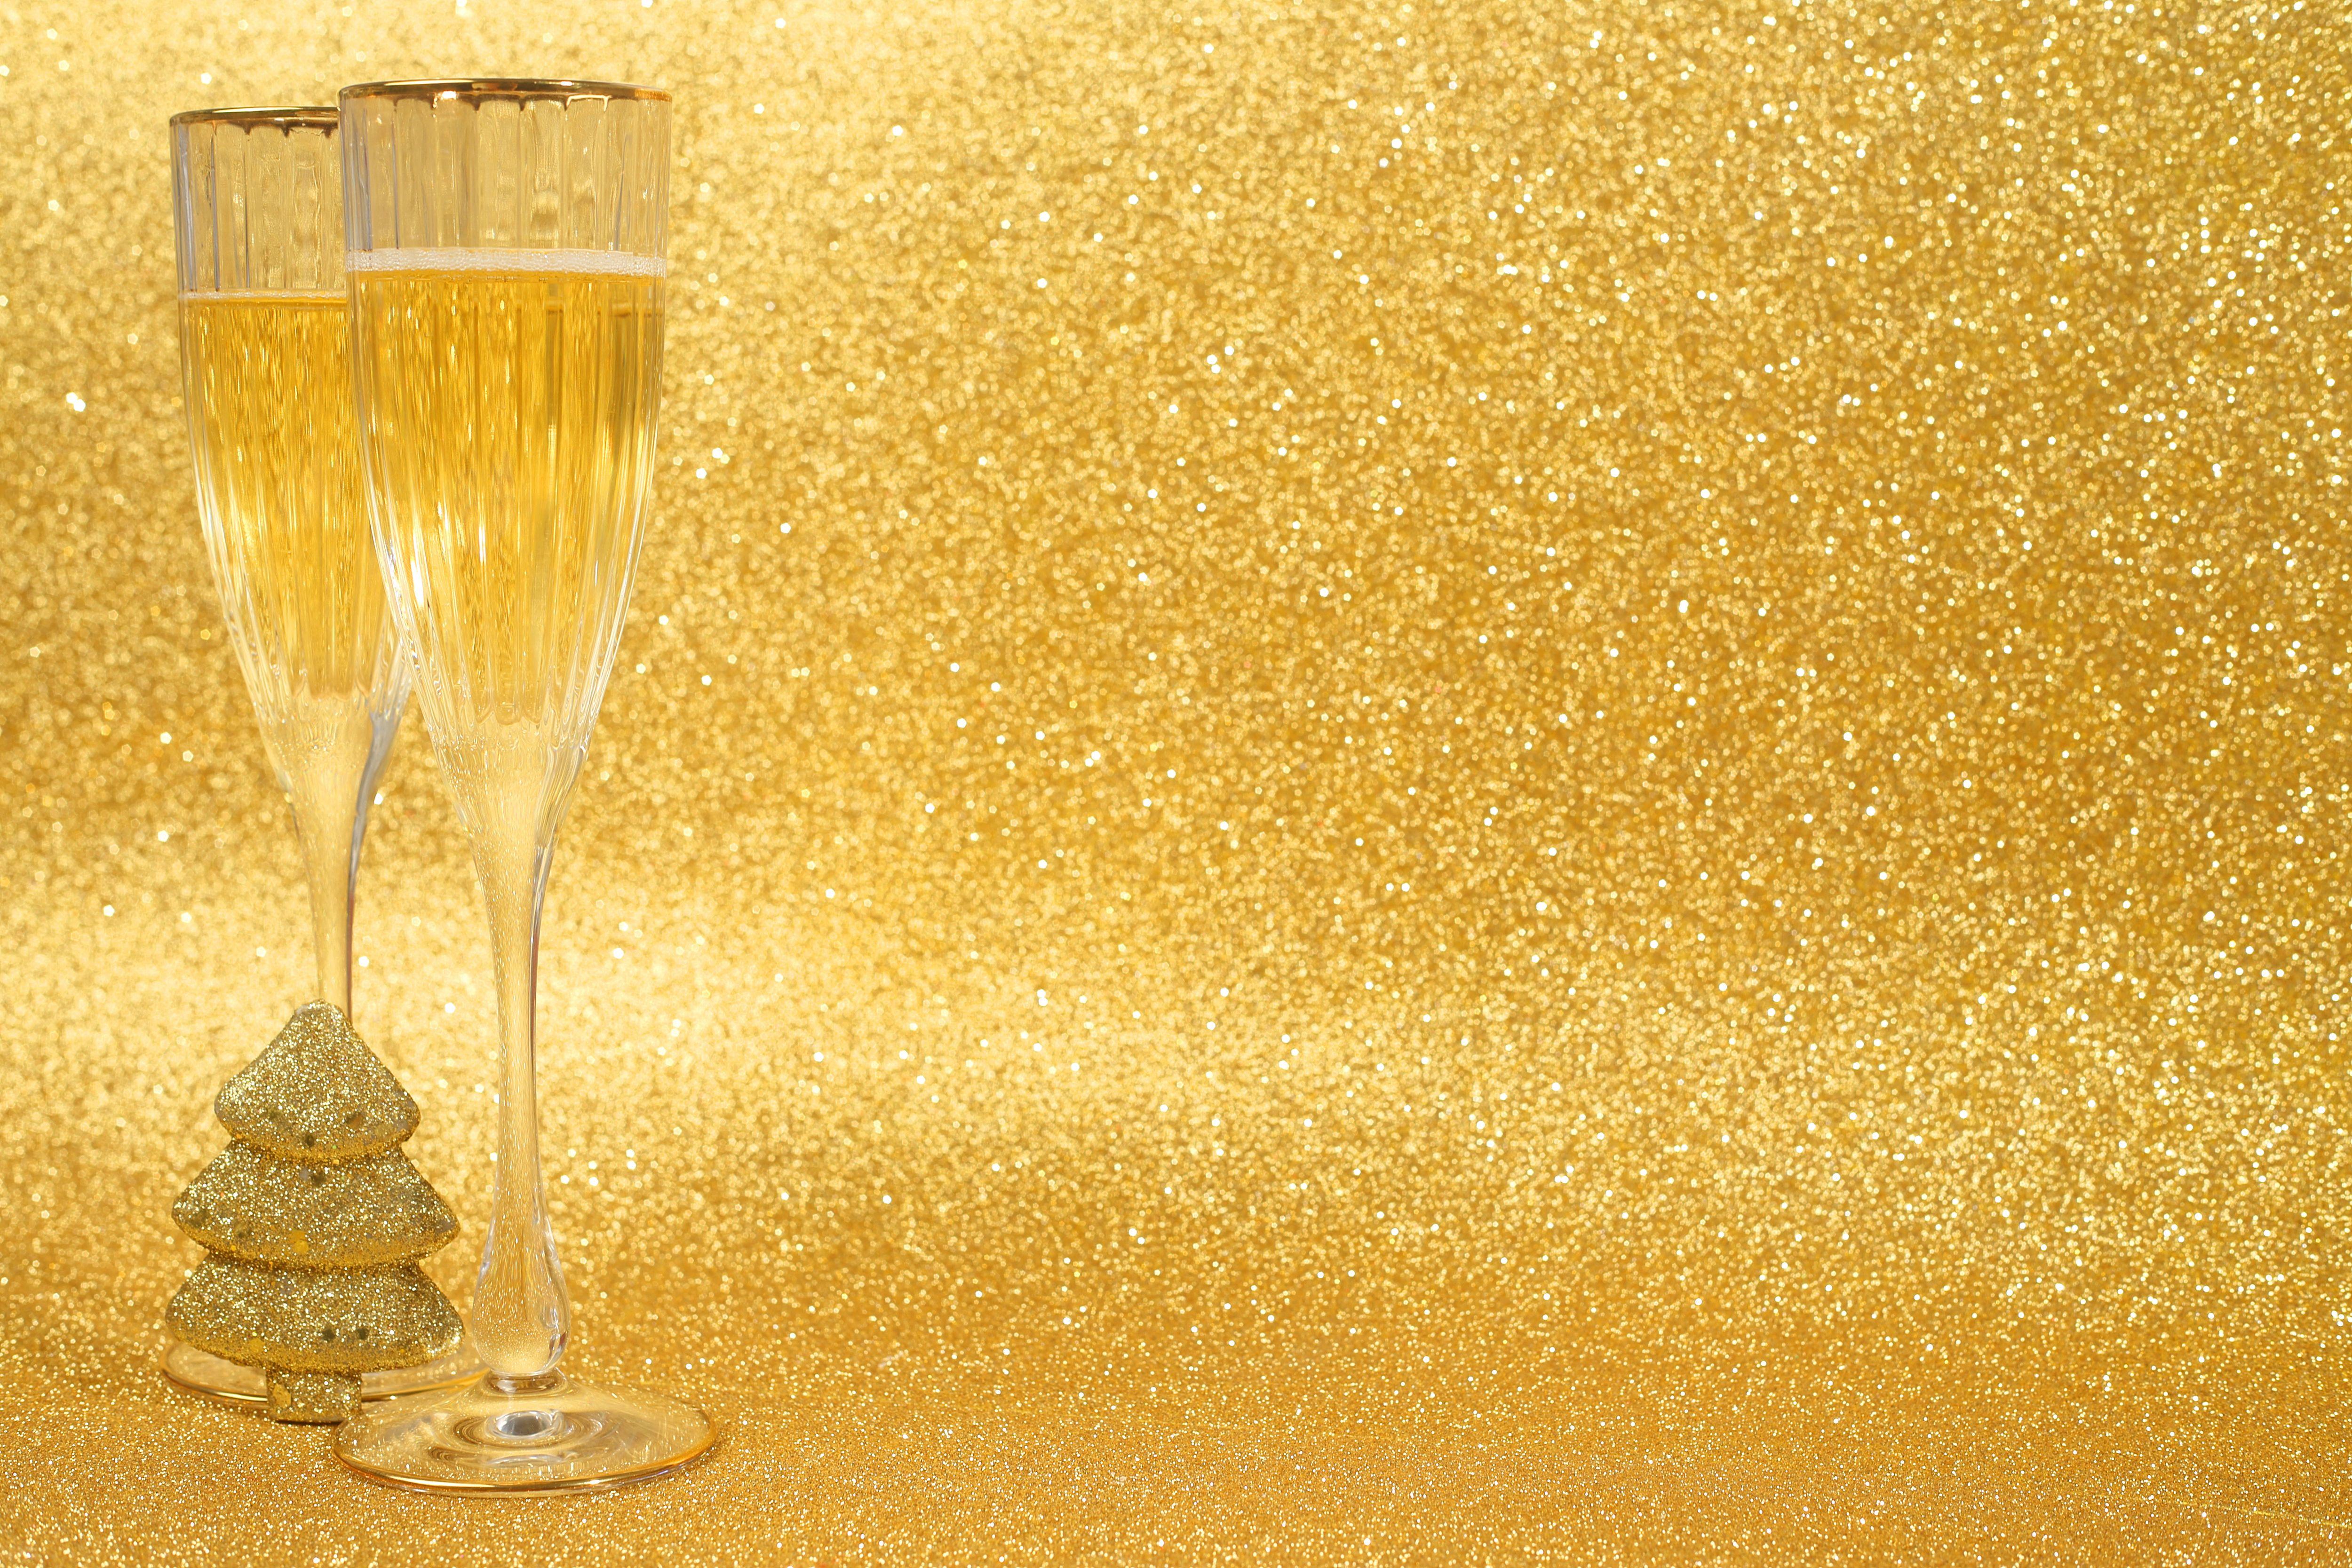 Gold New Year Background Quality Image And Transparent PNG Free Clipart